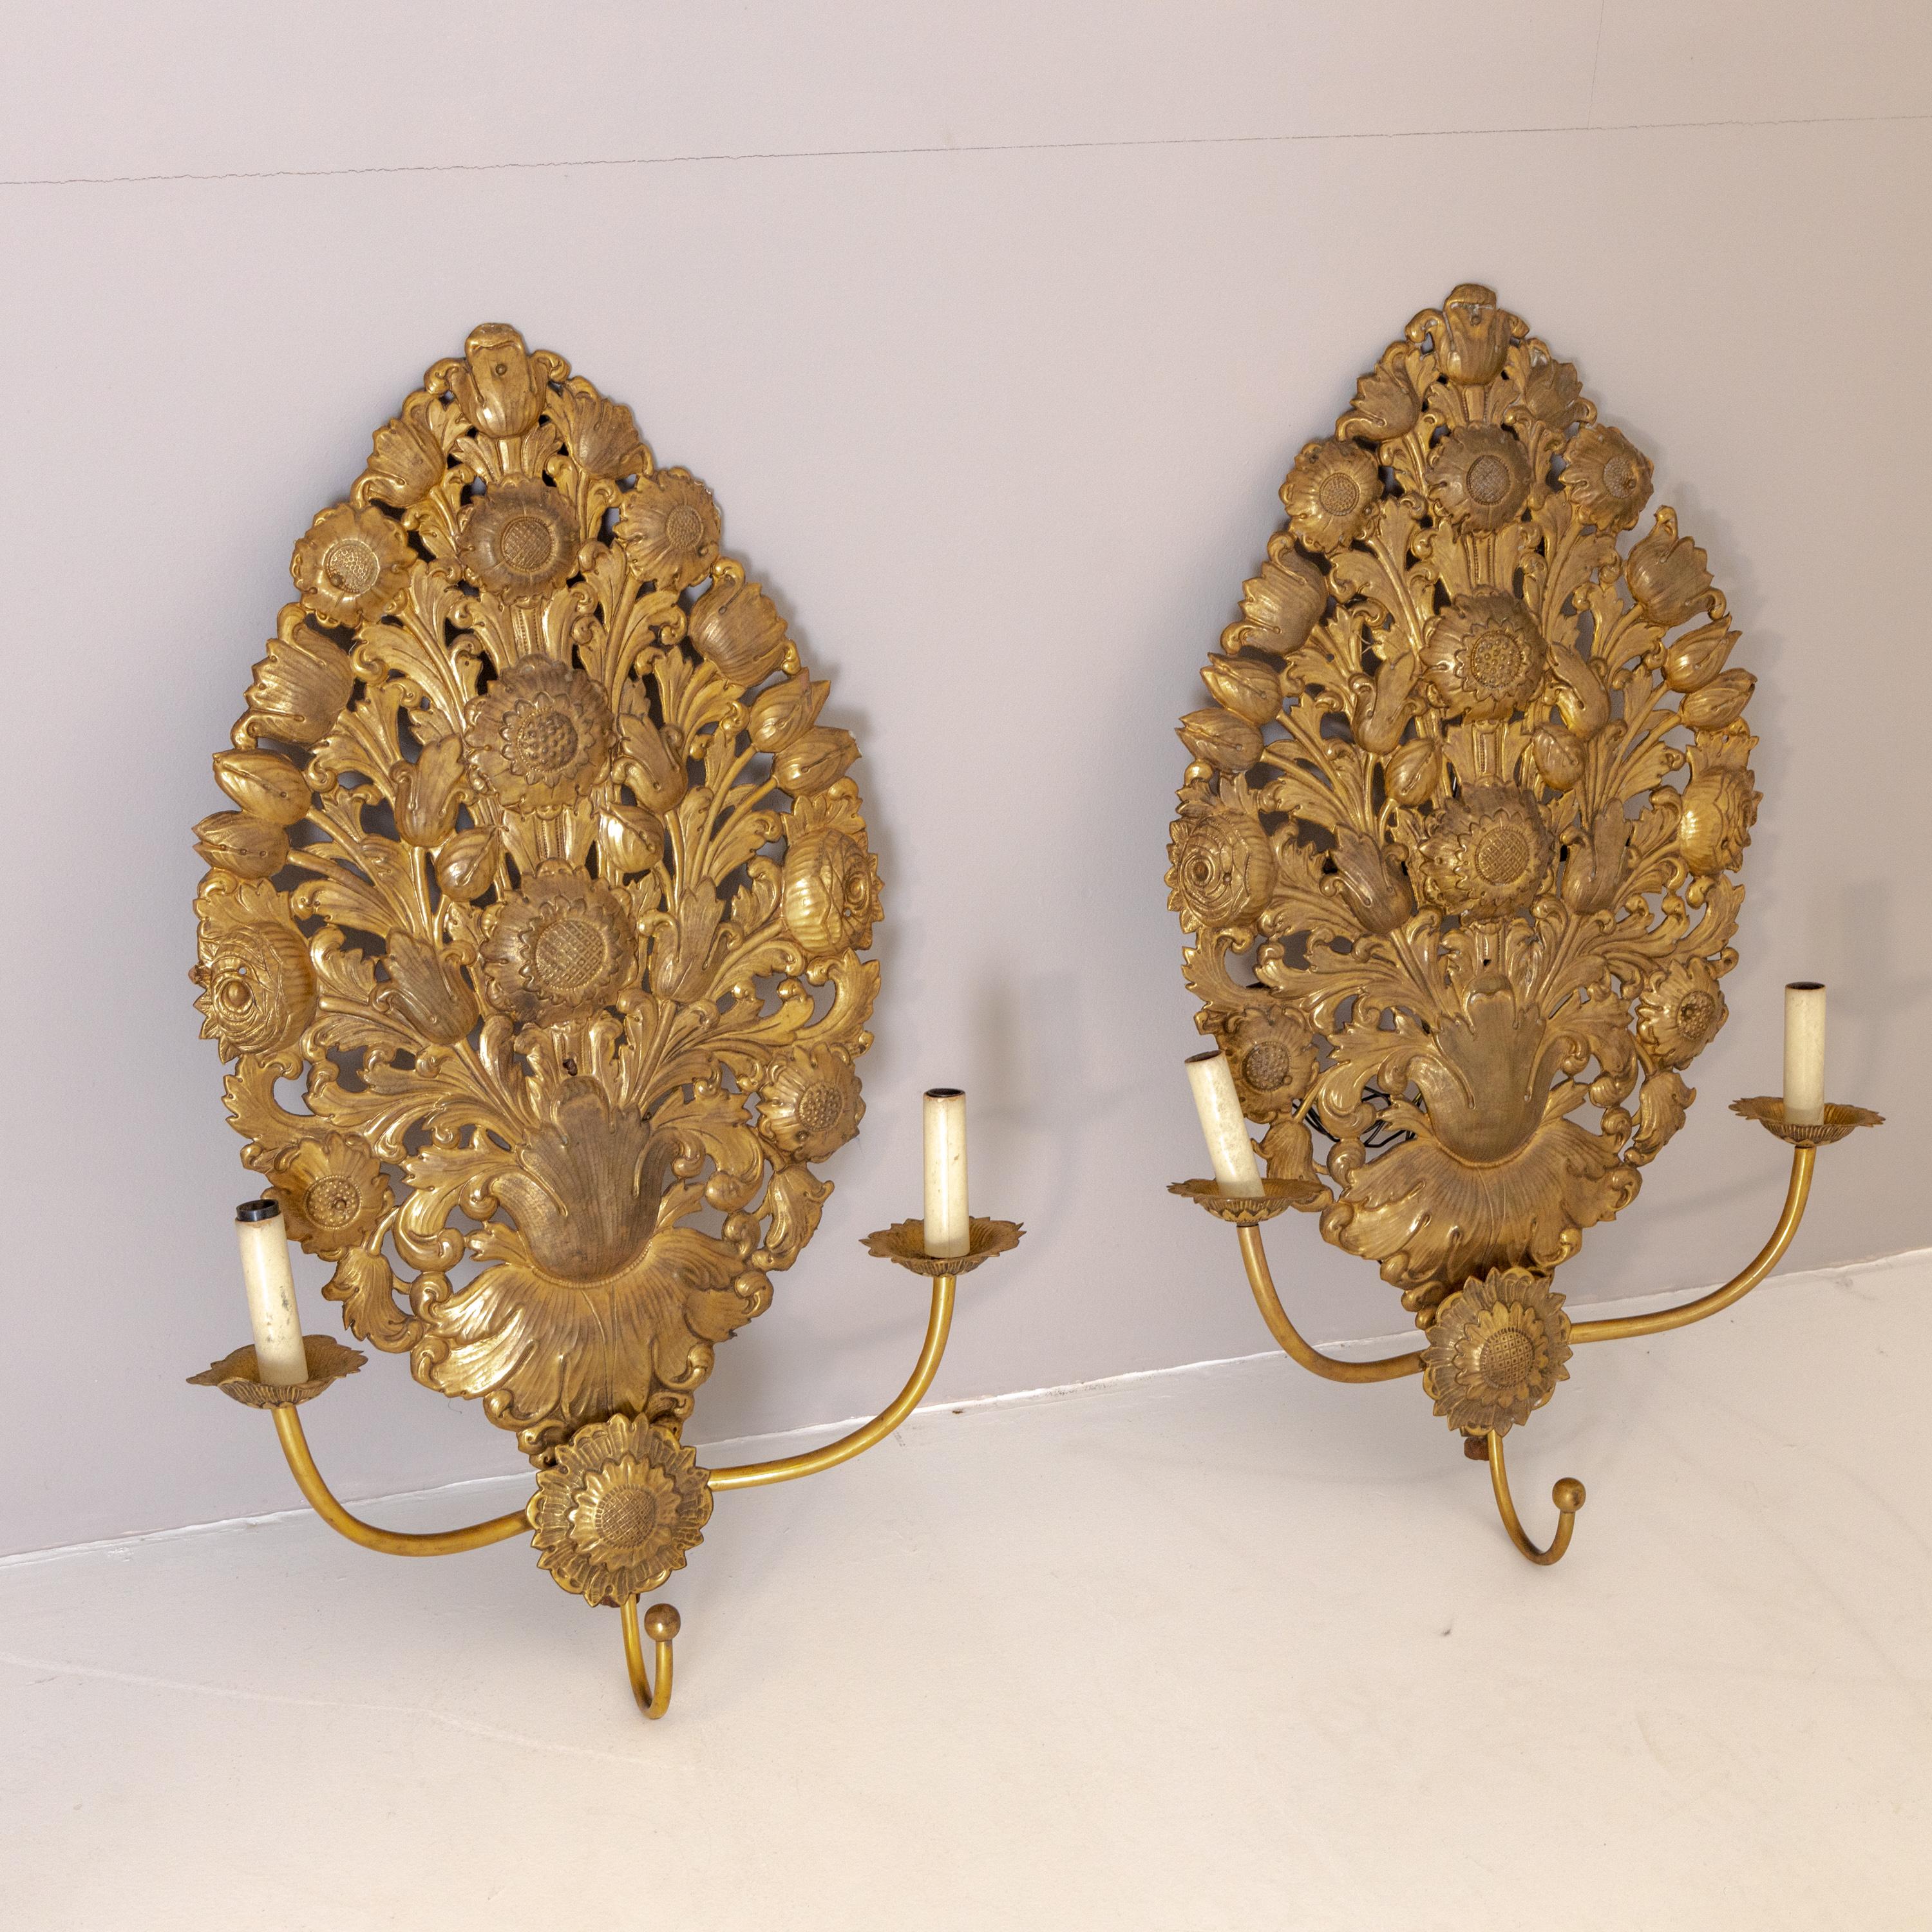 Two-armed wall appliques in baroque style made of chased brass in the shape of a large bouquet of flowers.